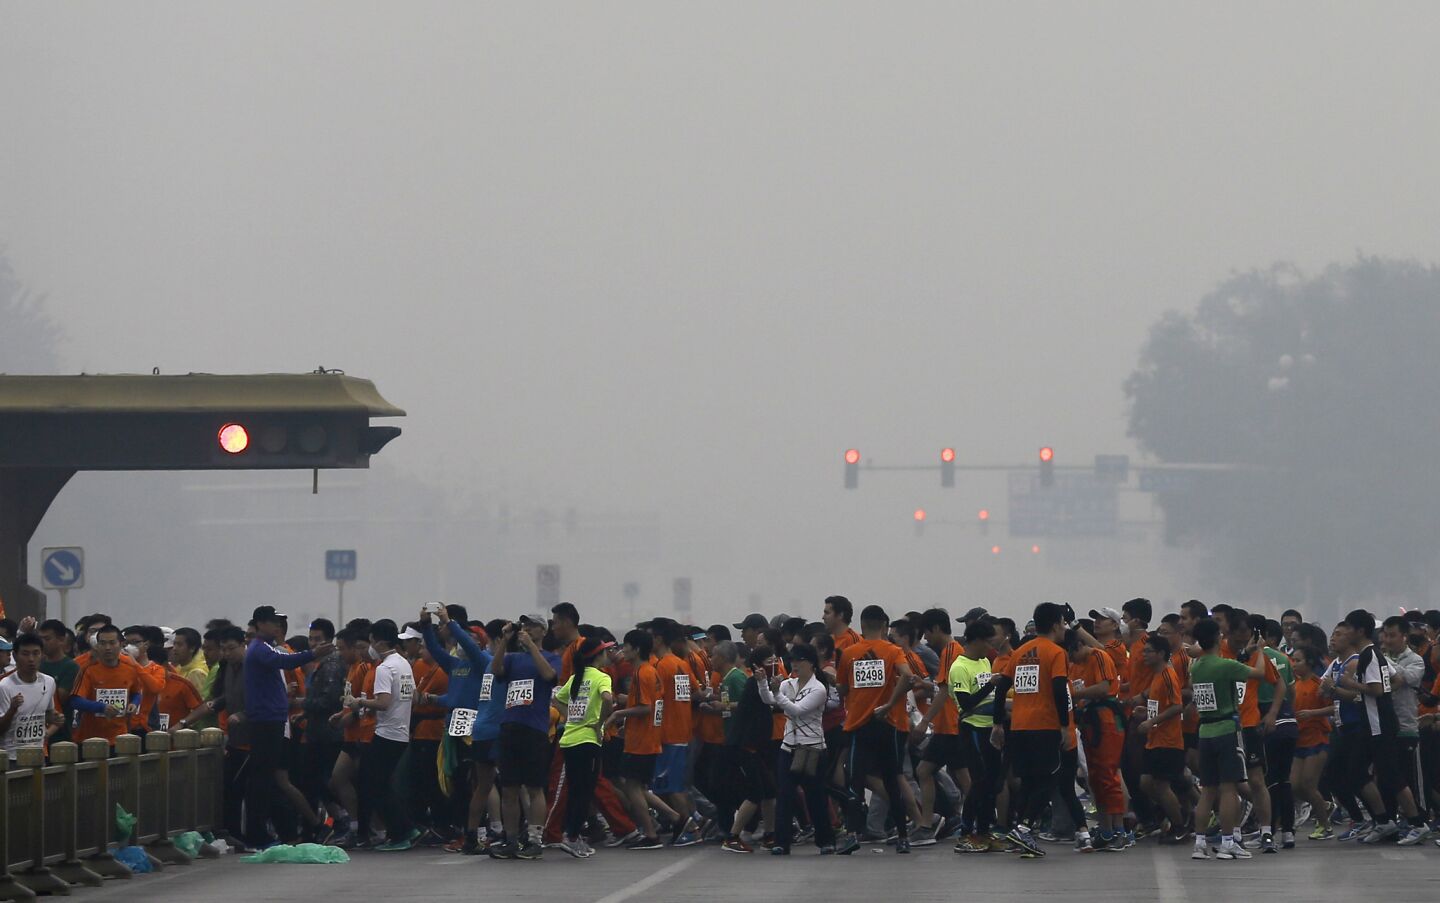 Runners jog past Chang'an Avenue near Tiananmen Square on Oct. 19.